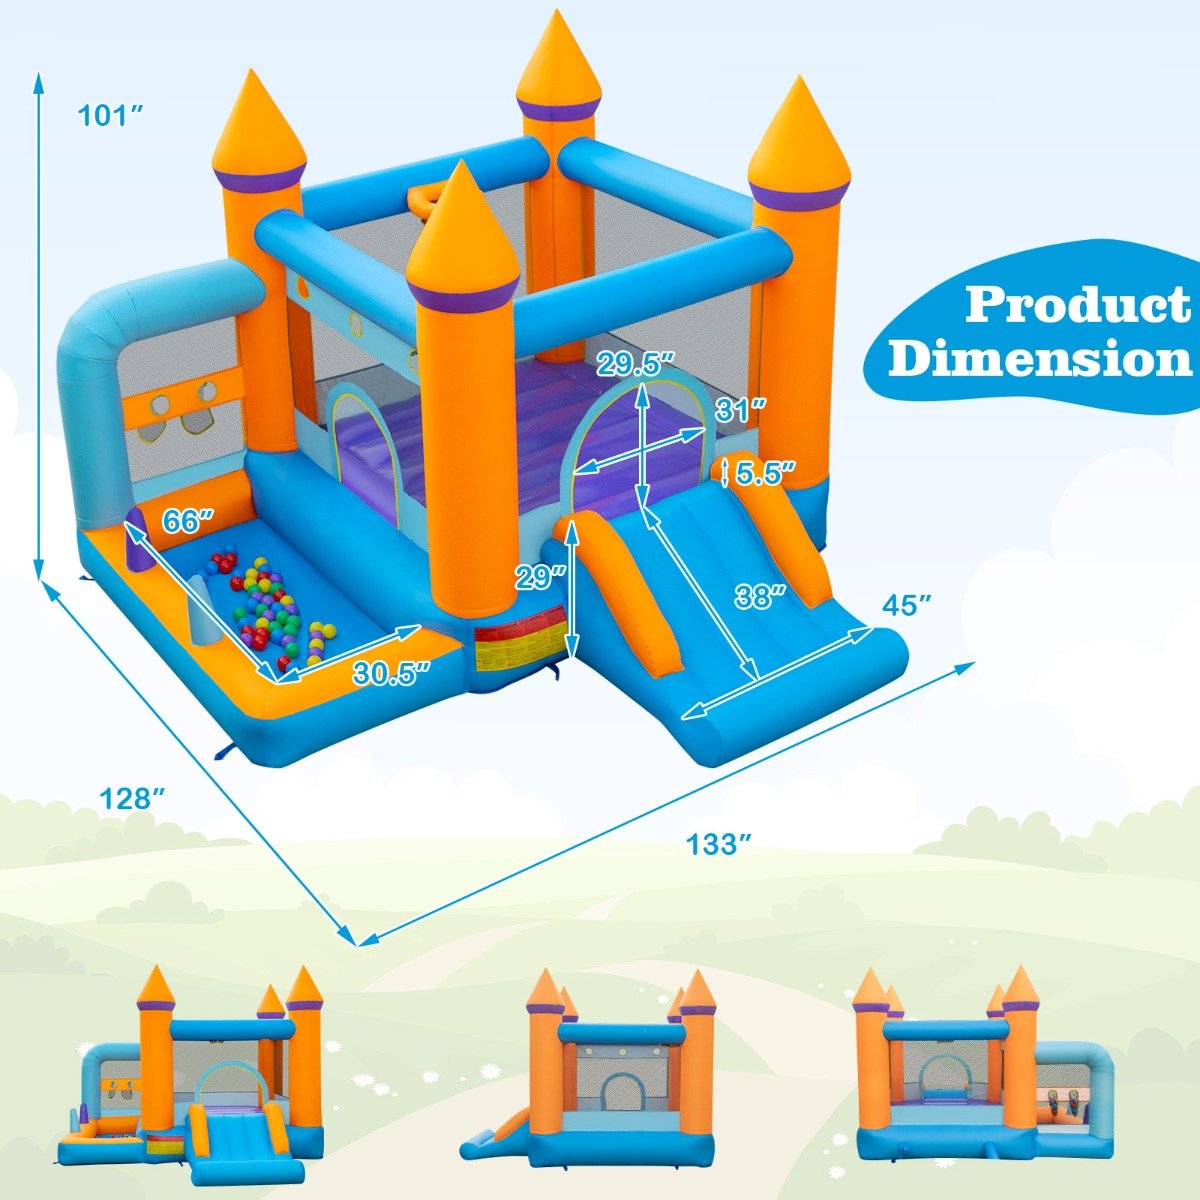 5-in-1 Bounce Castle - Your Destination for Endless Fun